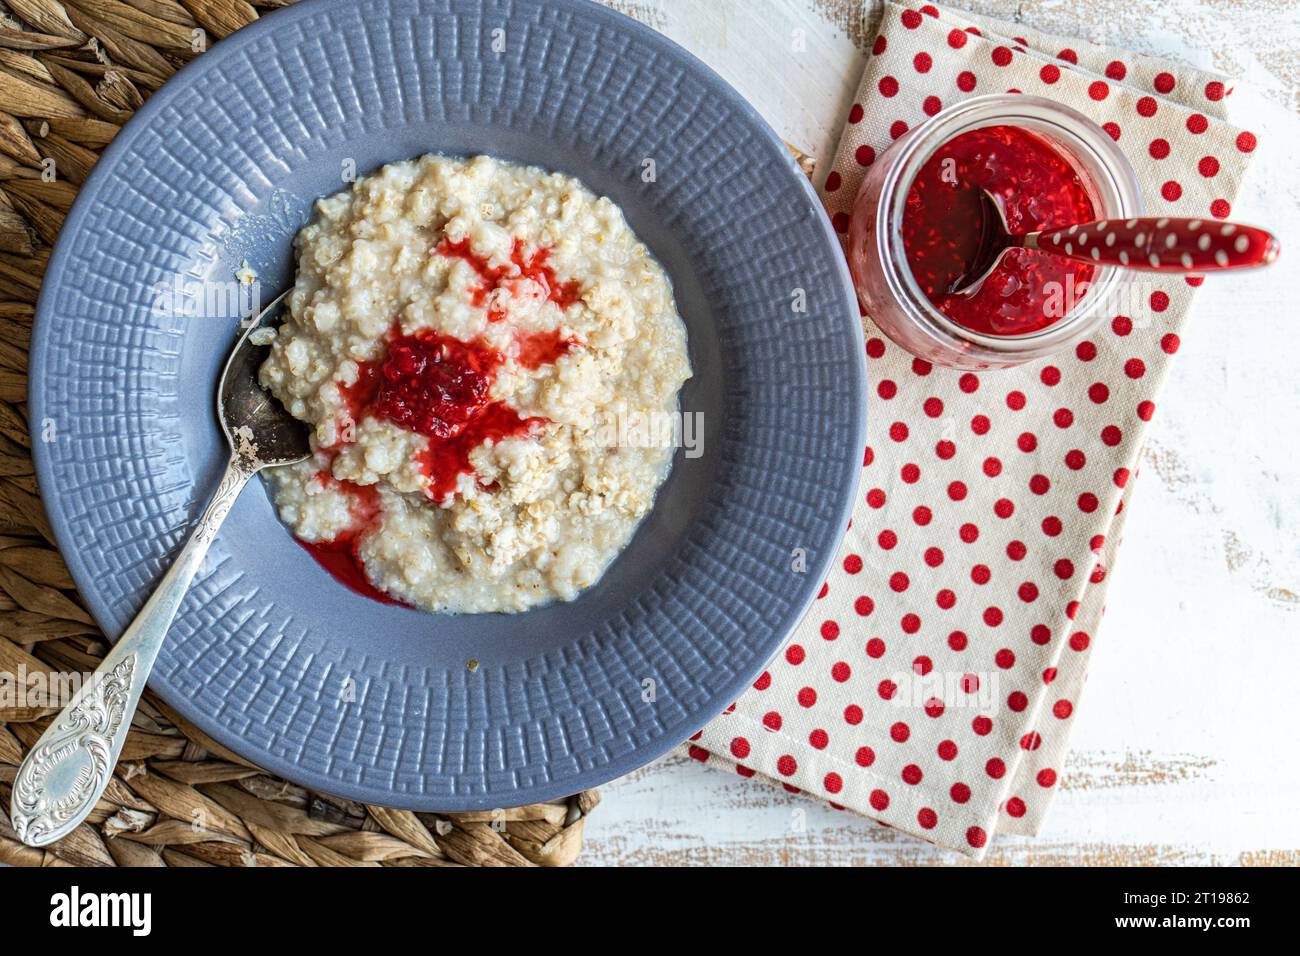 Overhead view of a bowl of oatmeal with raspberry jam Stock Photo